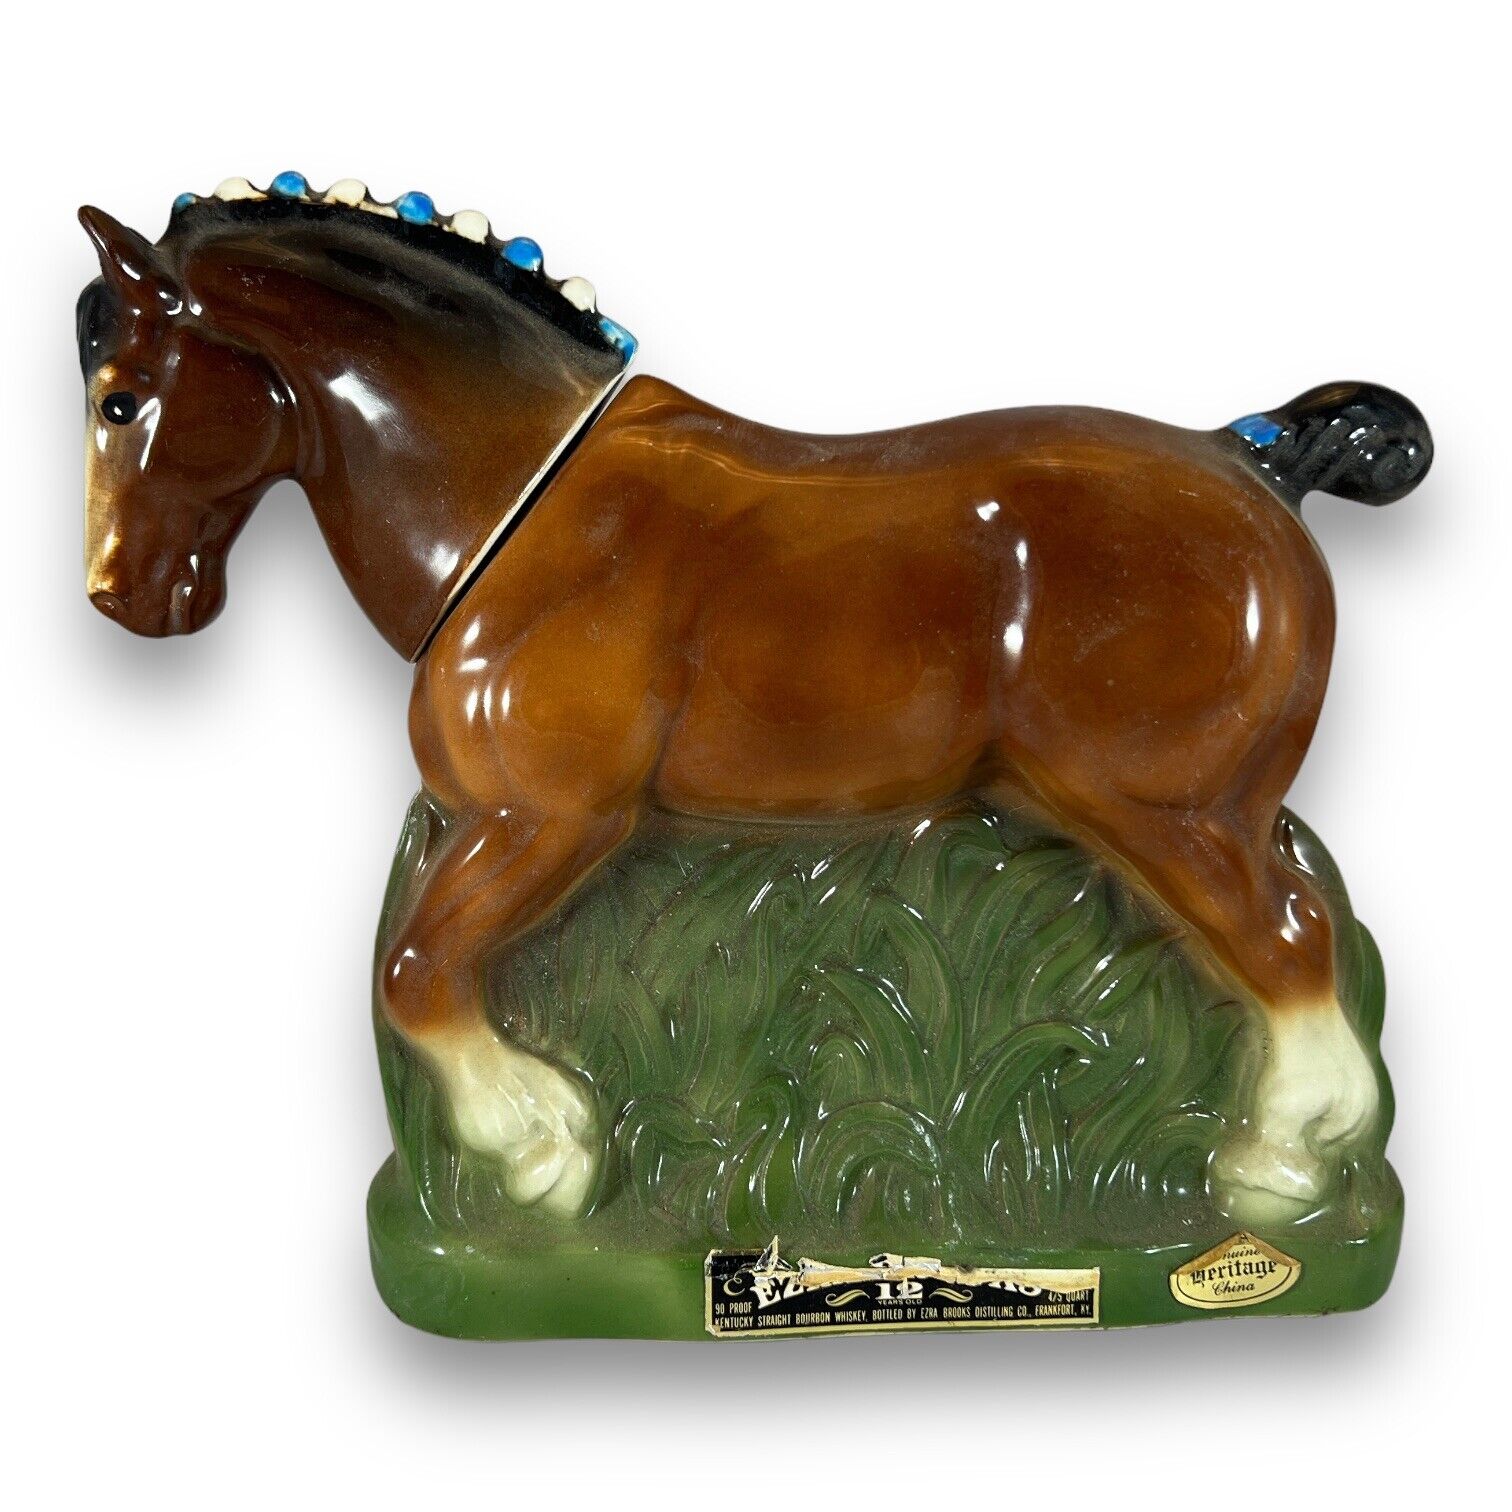 Beautiful Vtg  Ezra Brooks Heritage China  Clydesdale Horse Decanter 1974